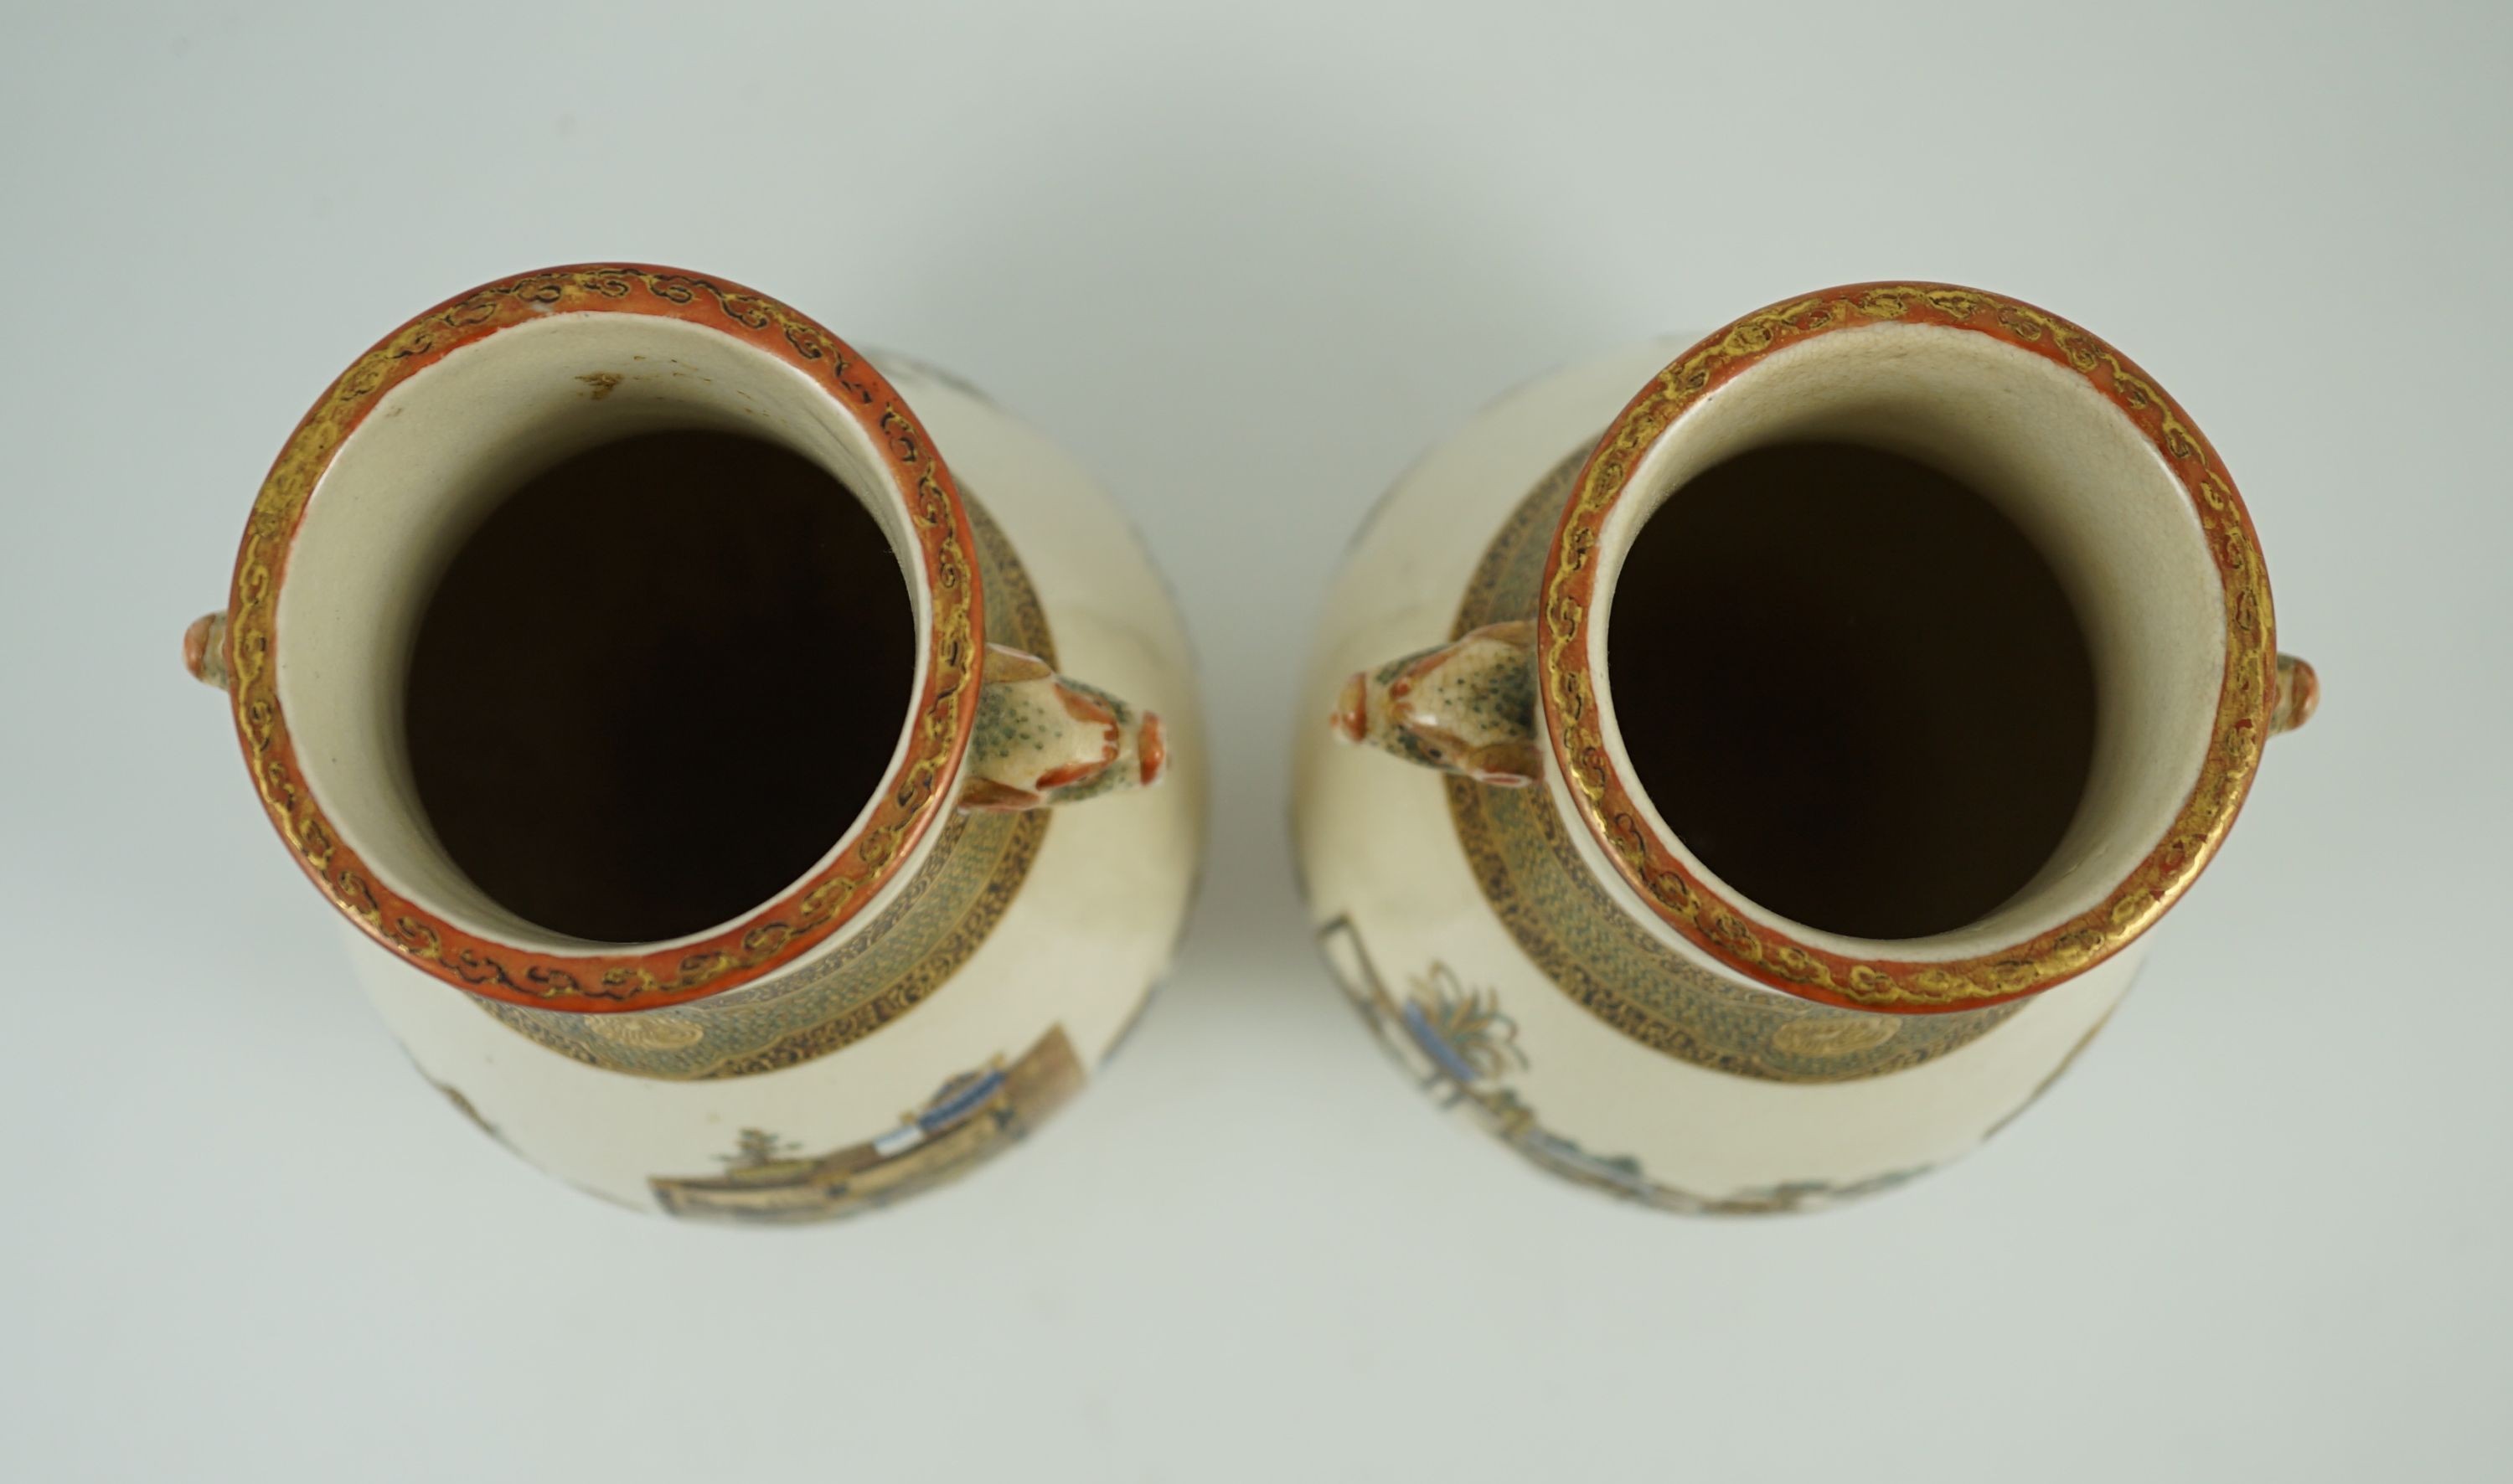 A pair of Japanese Satsuma pottery vases, by Bizan, Meiji period, 18.2cm high